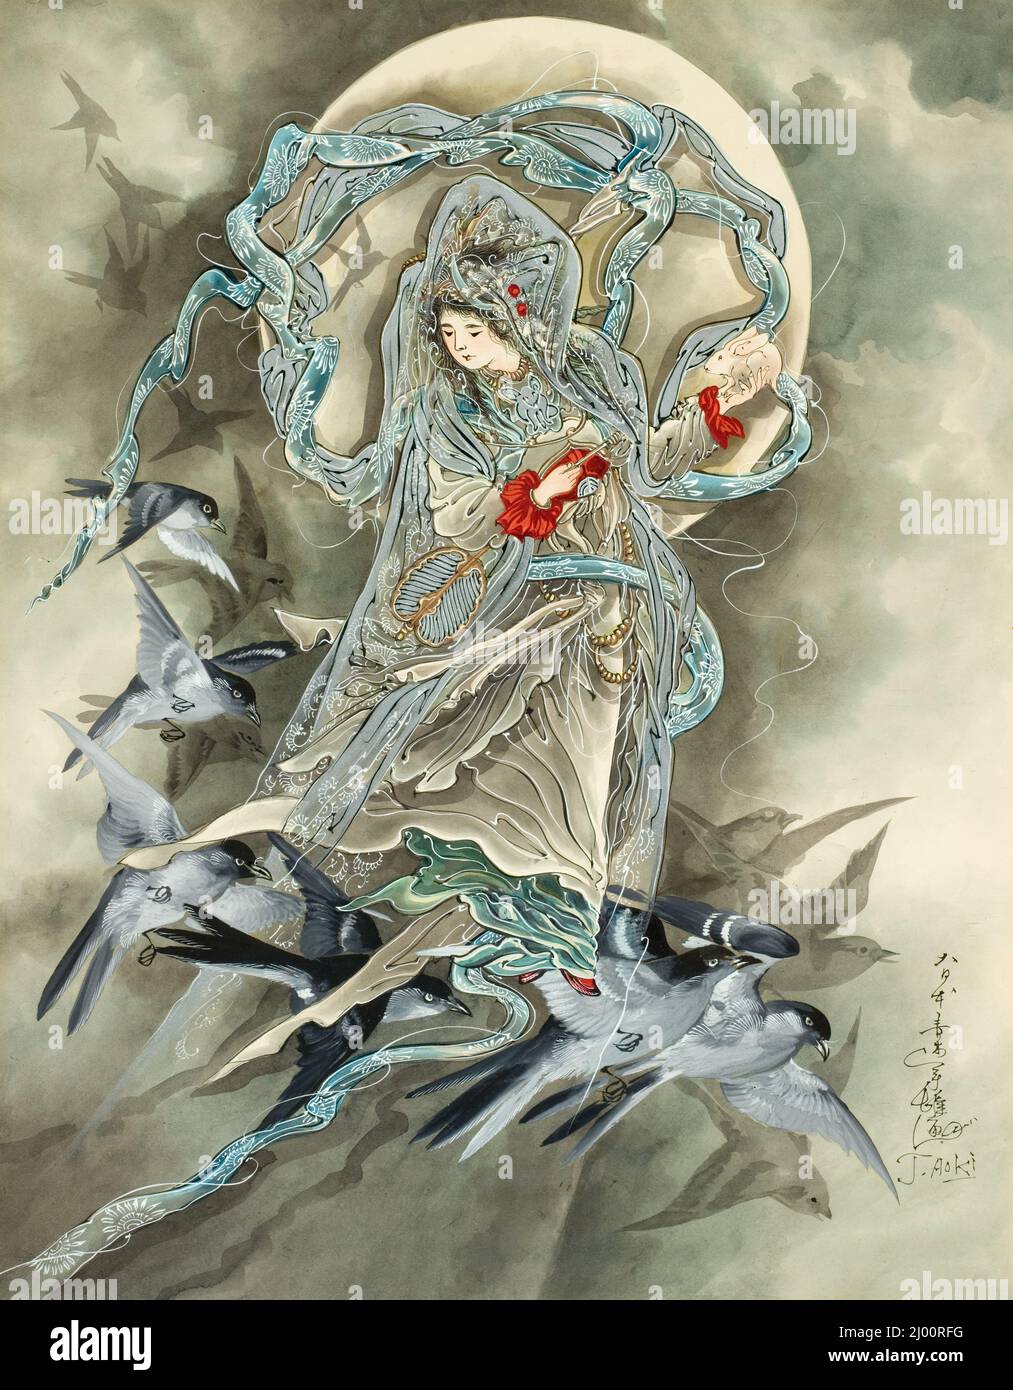 Woman with Birds. Toshio Aoki (Japan, active United States, 1854-1912). United States, 1890s. Drawings. Watercolor on paper Stock Photo